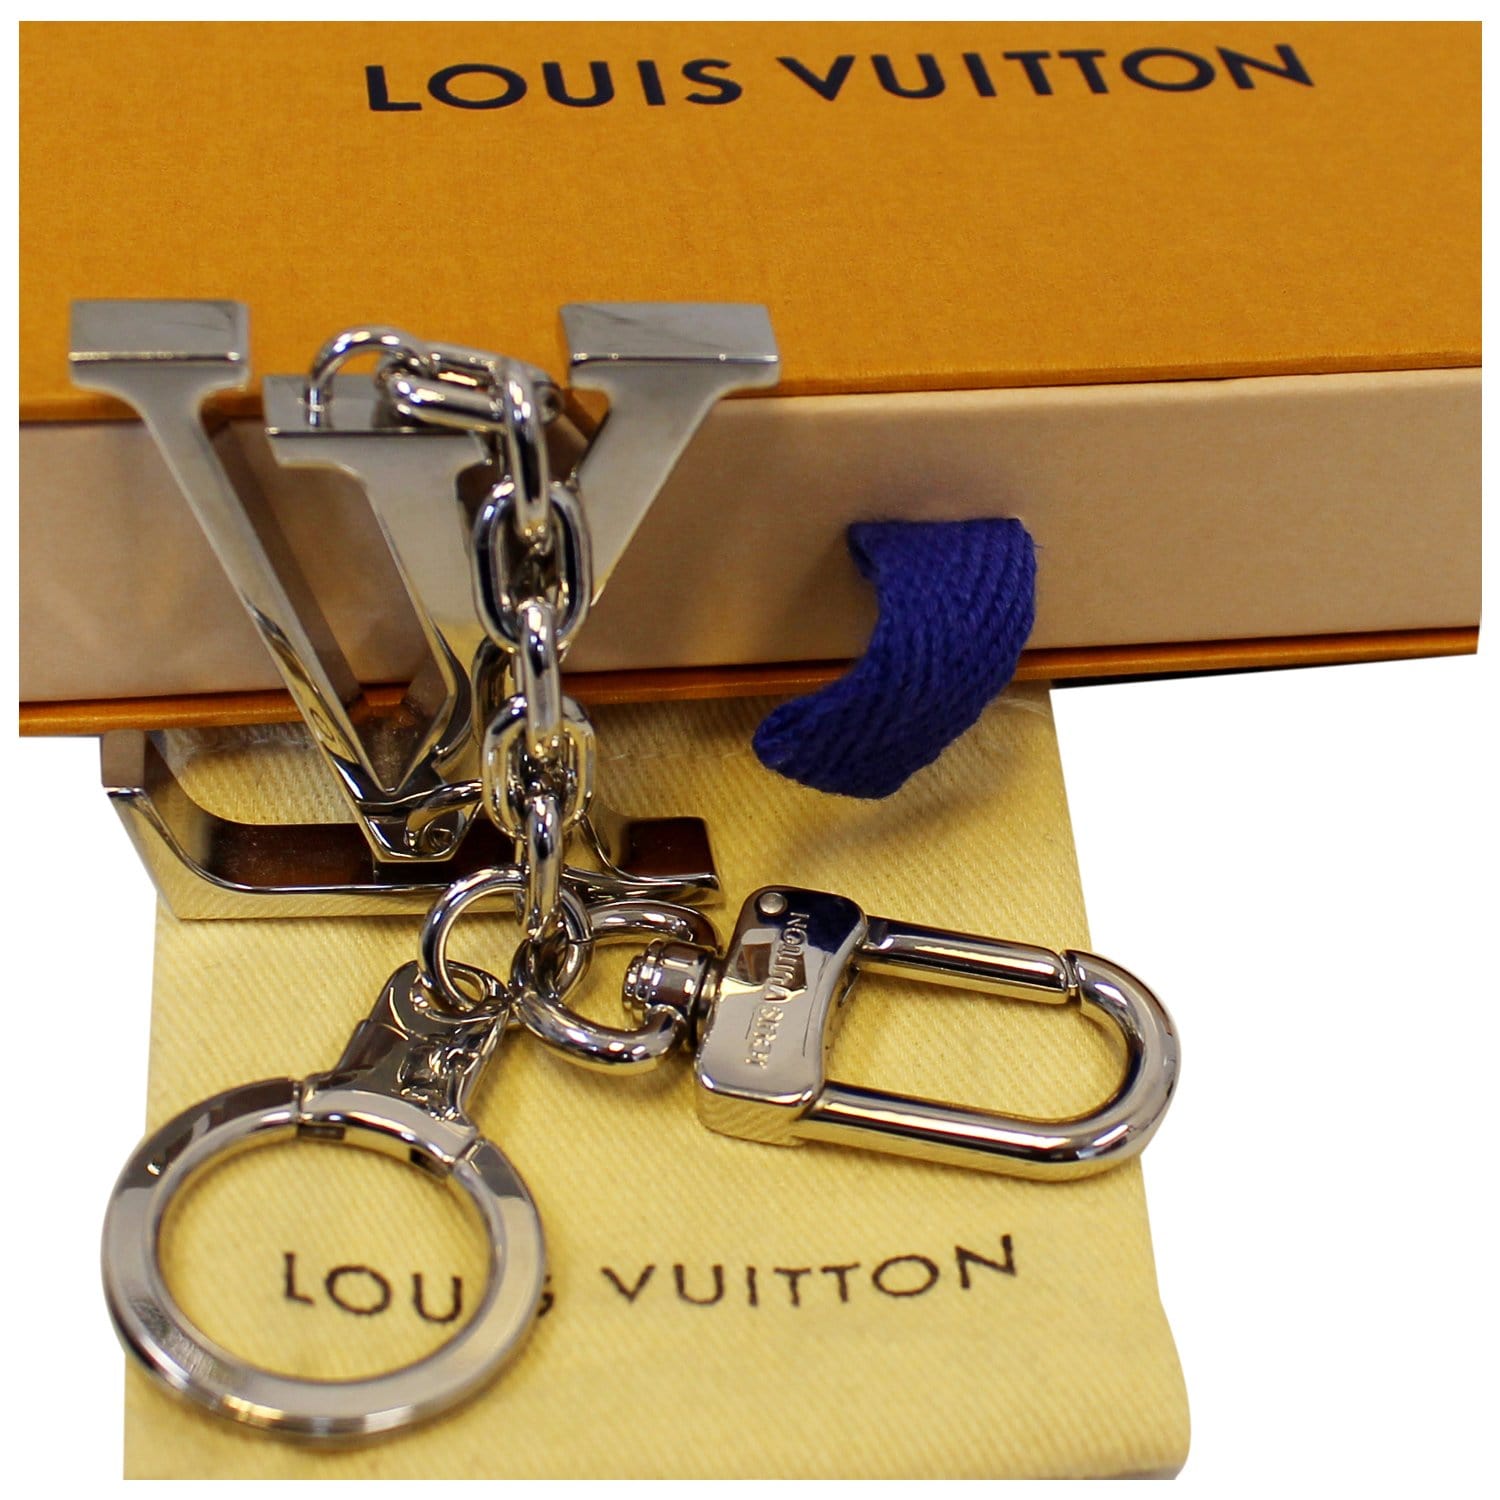 Shop Louis Vuitton Leather Logo Keychains & Bag Charms by